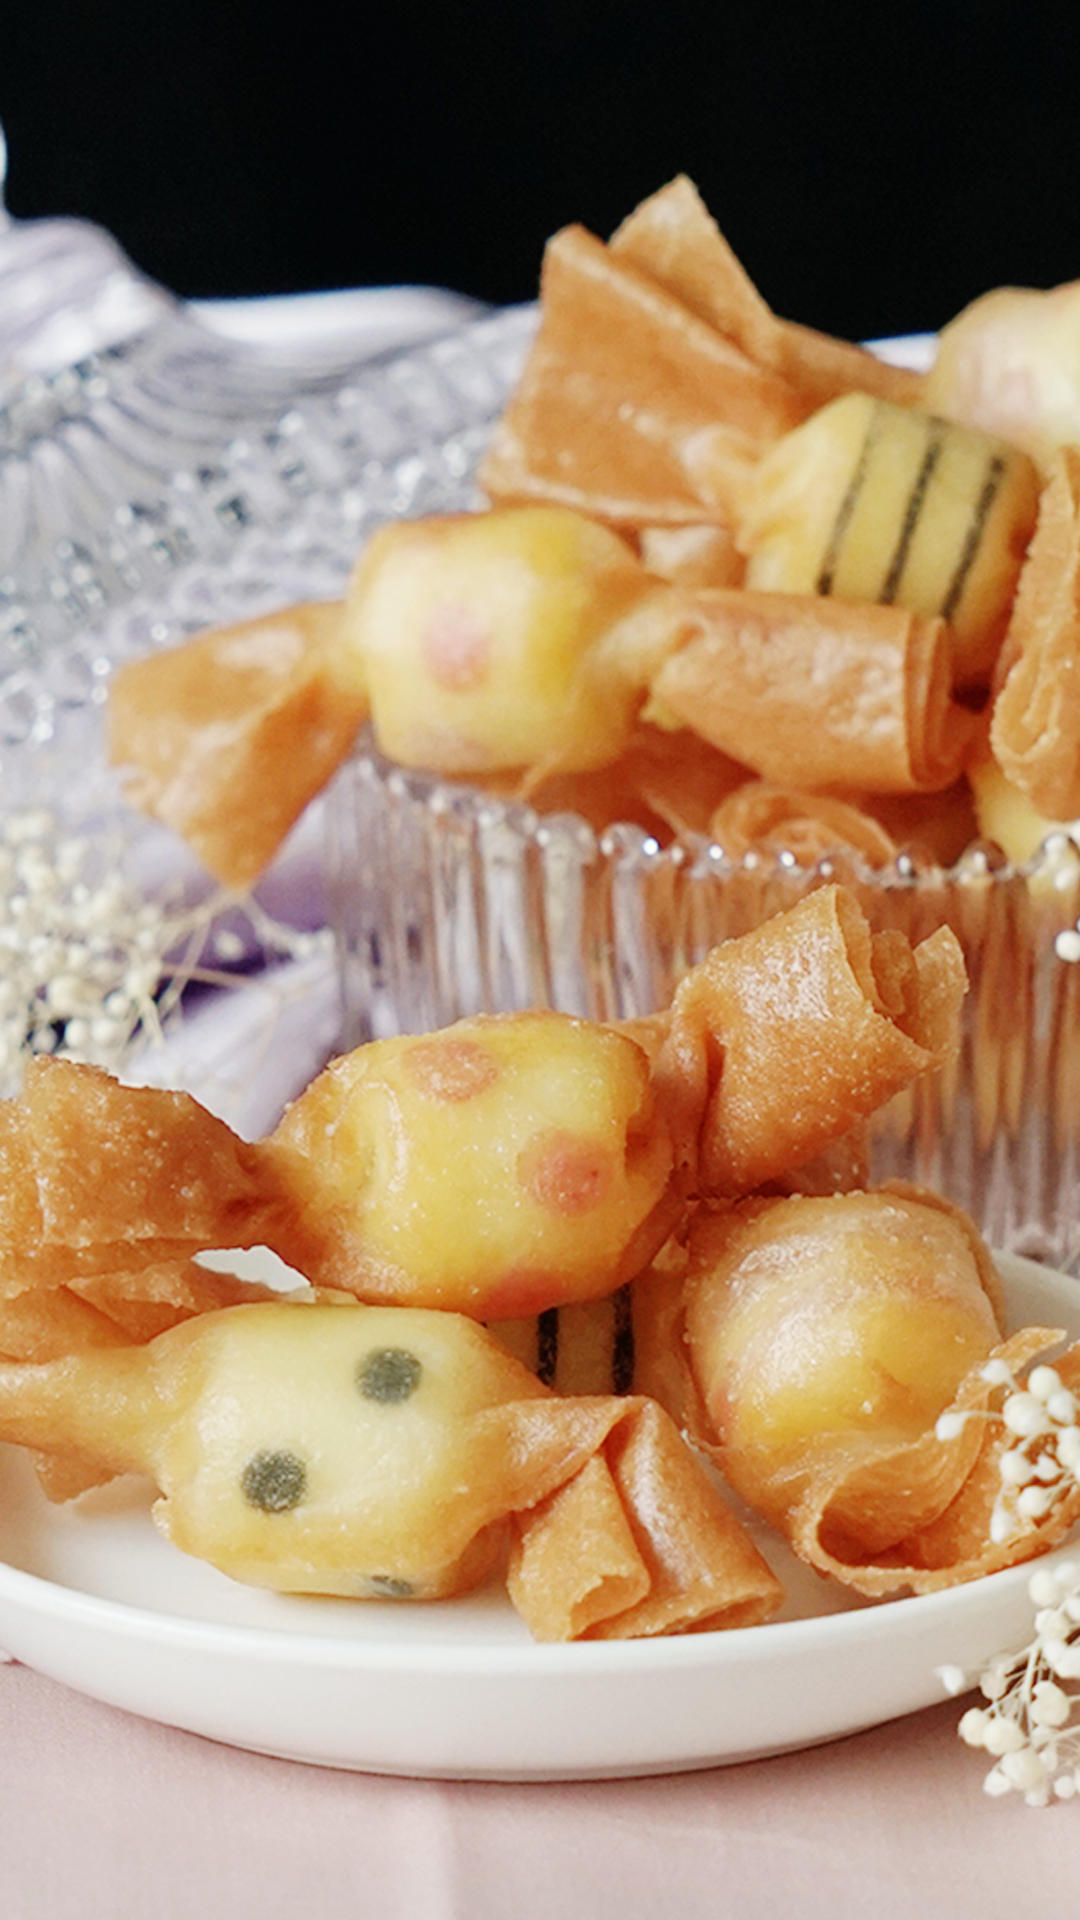 Cheese "Candies"